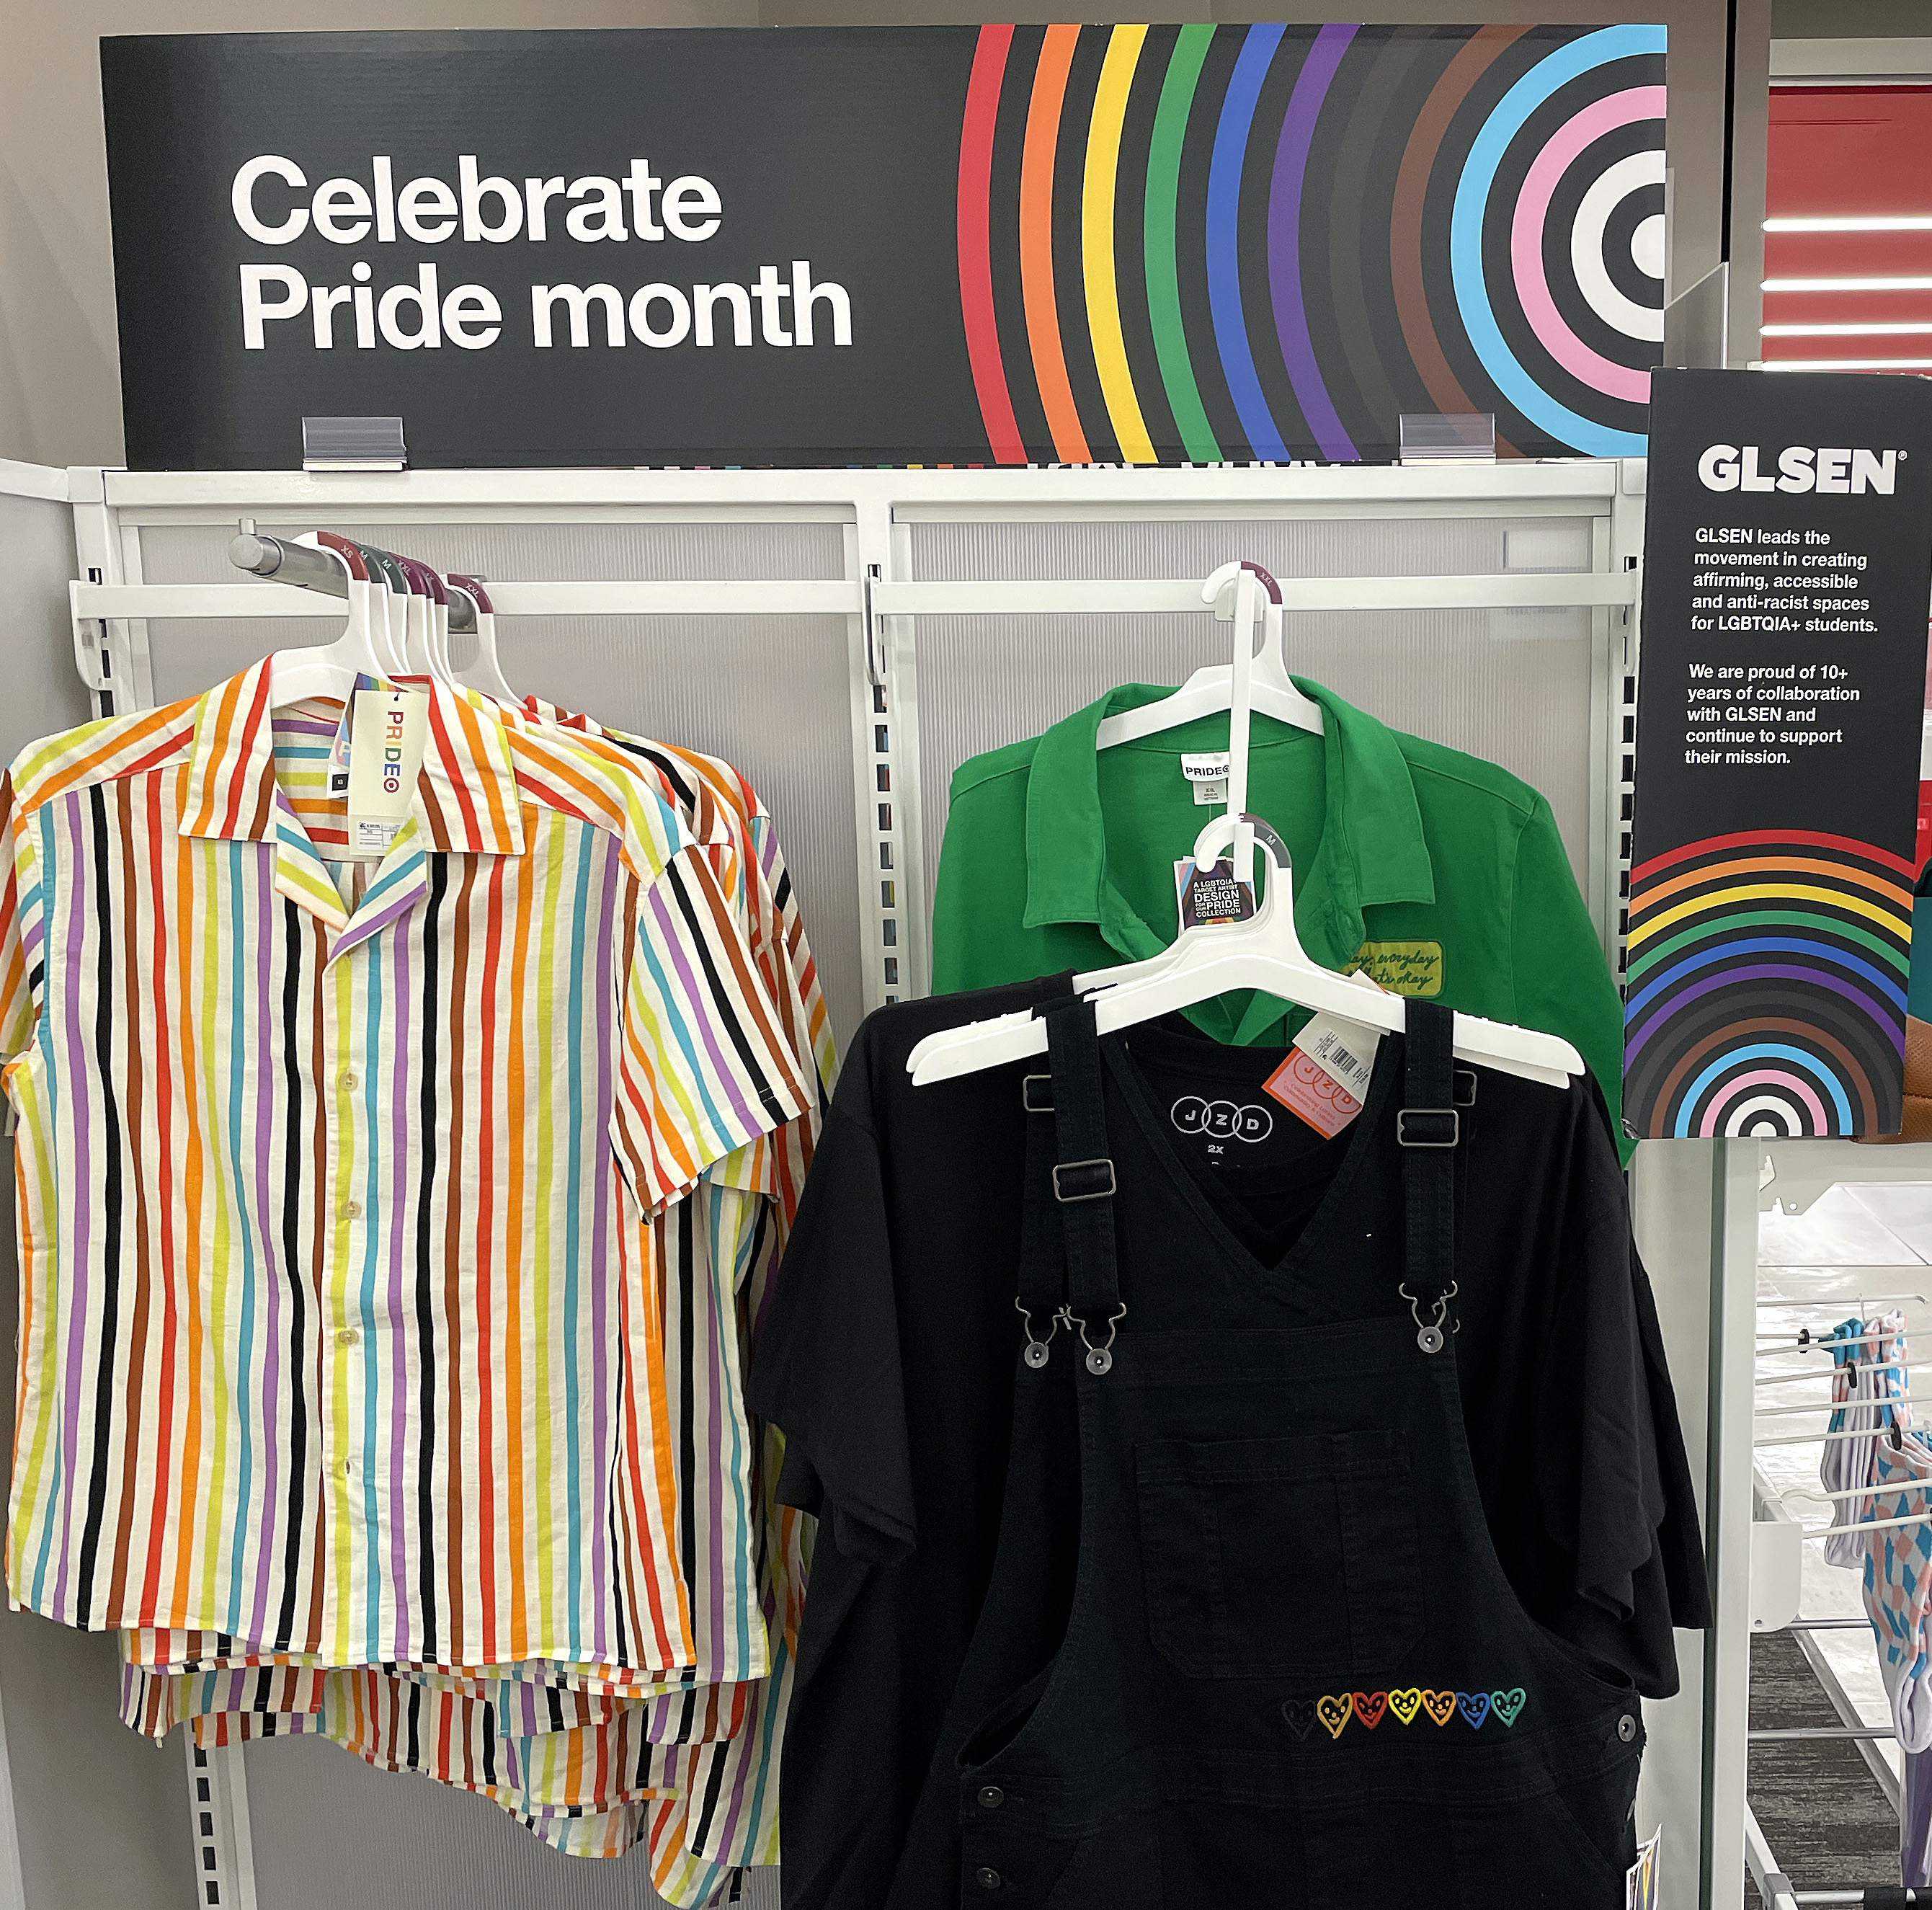 Only some Target stores will carry Pride Month merch following last year's backlash